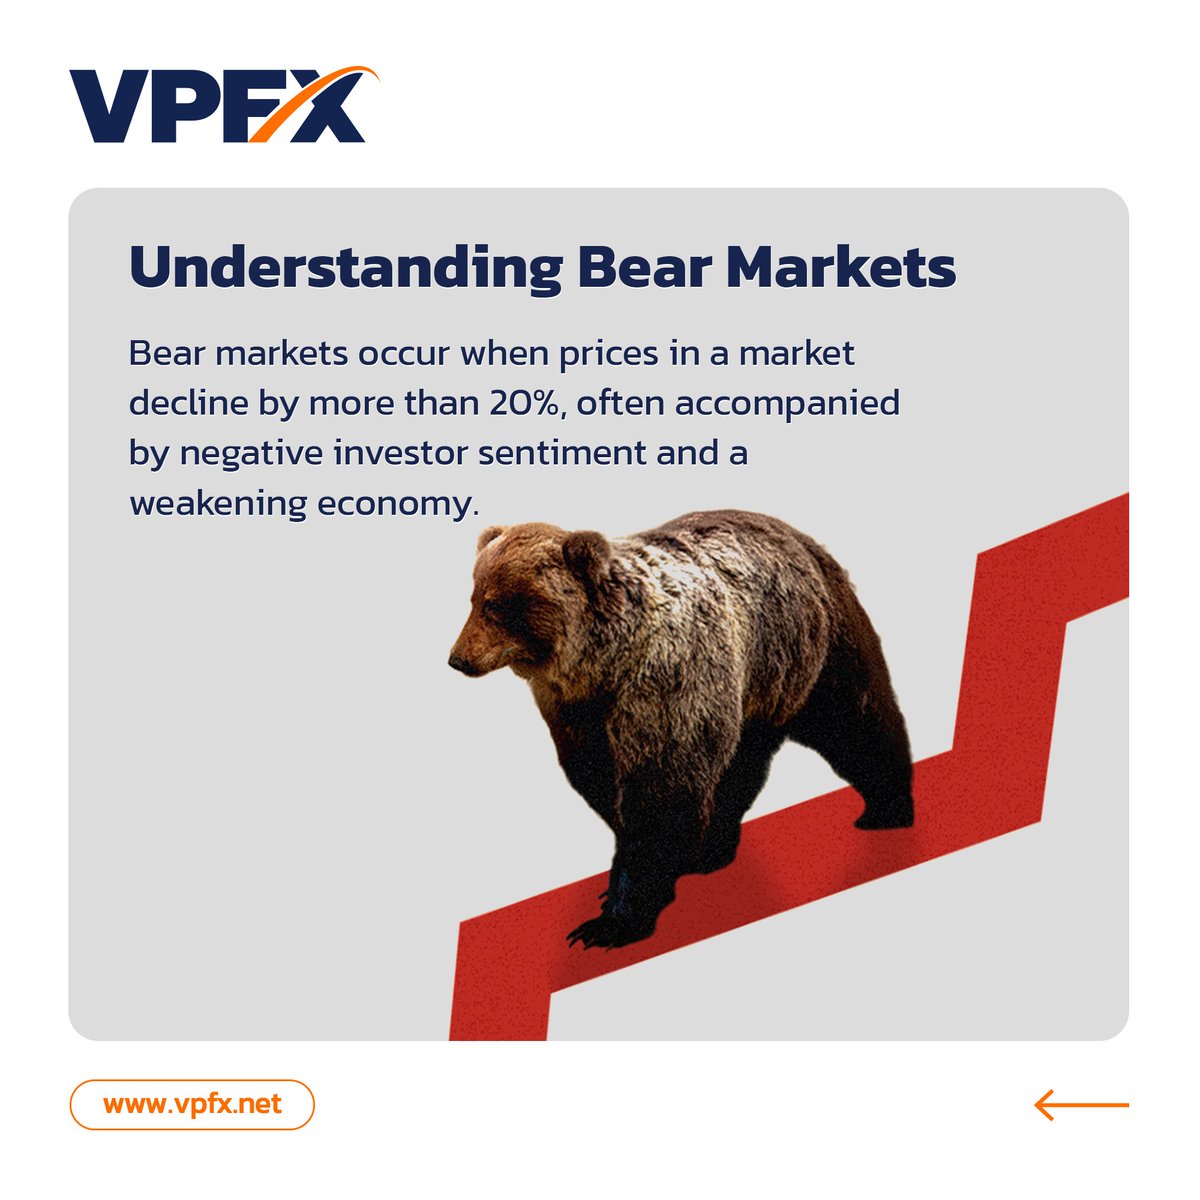 What Is a Bear Market? A bear market is a financial market experiencing prolonged price declines, generally of 20% or more. #vpfx #bear #market #education #informative #carousel #forexbroker #forexmarket #forexnews